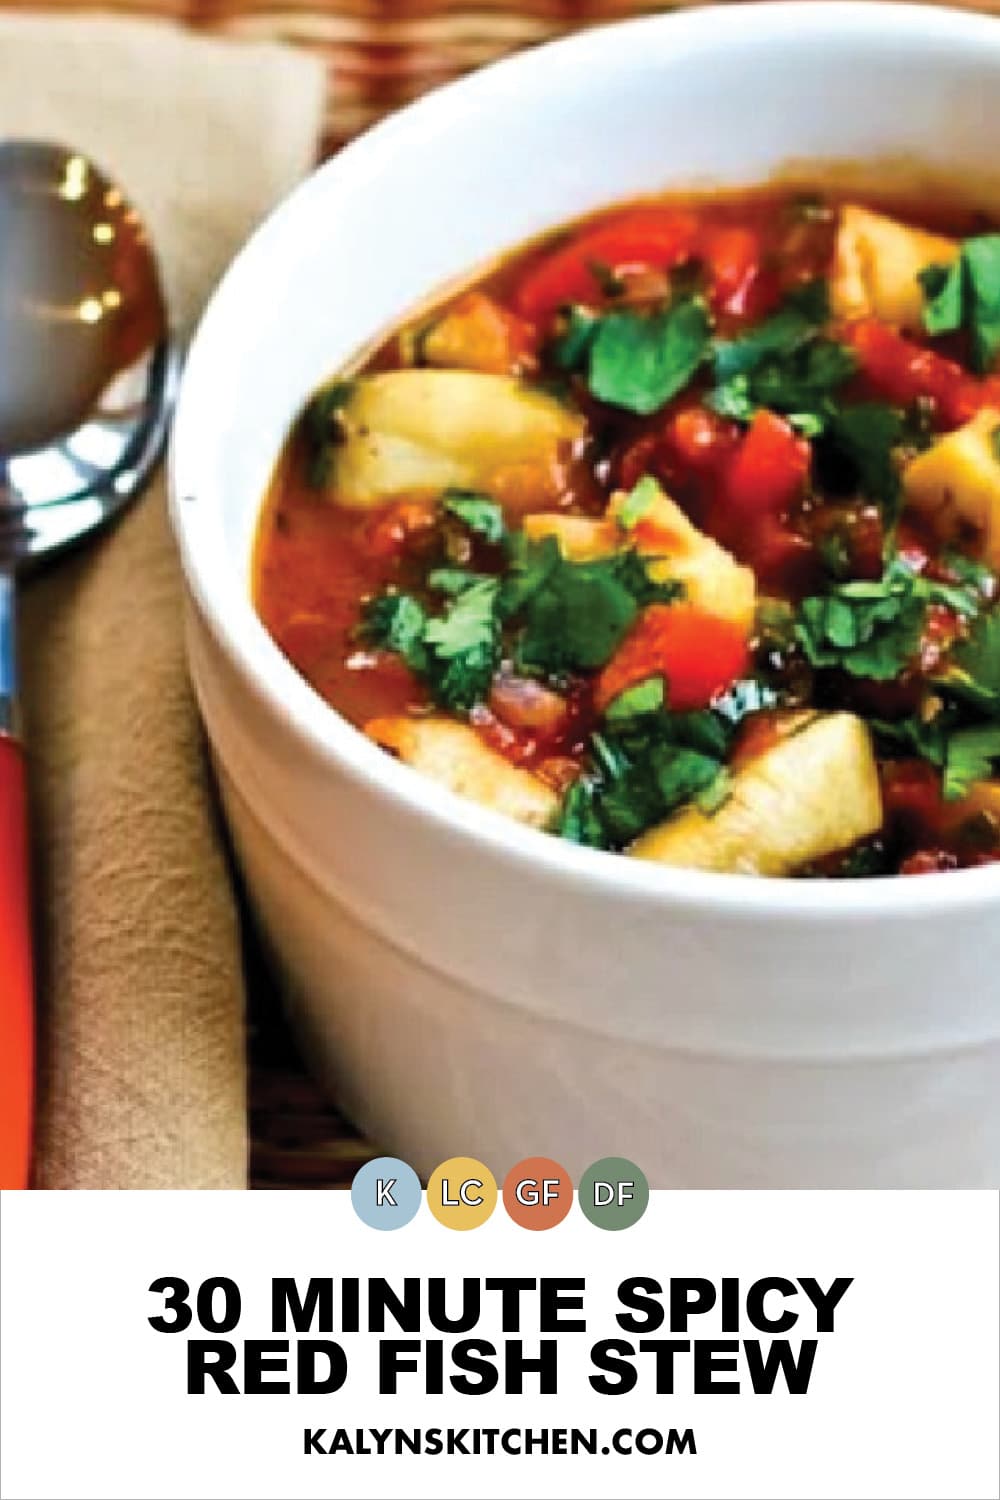 Pinterest image of 30 Minute Spicy Red Fish Stew